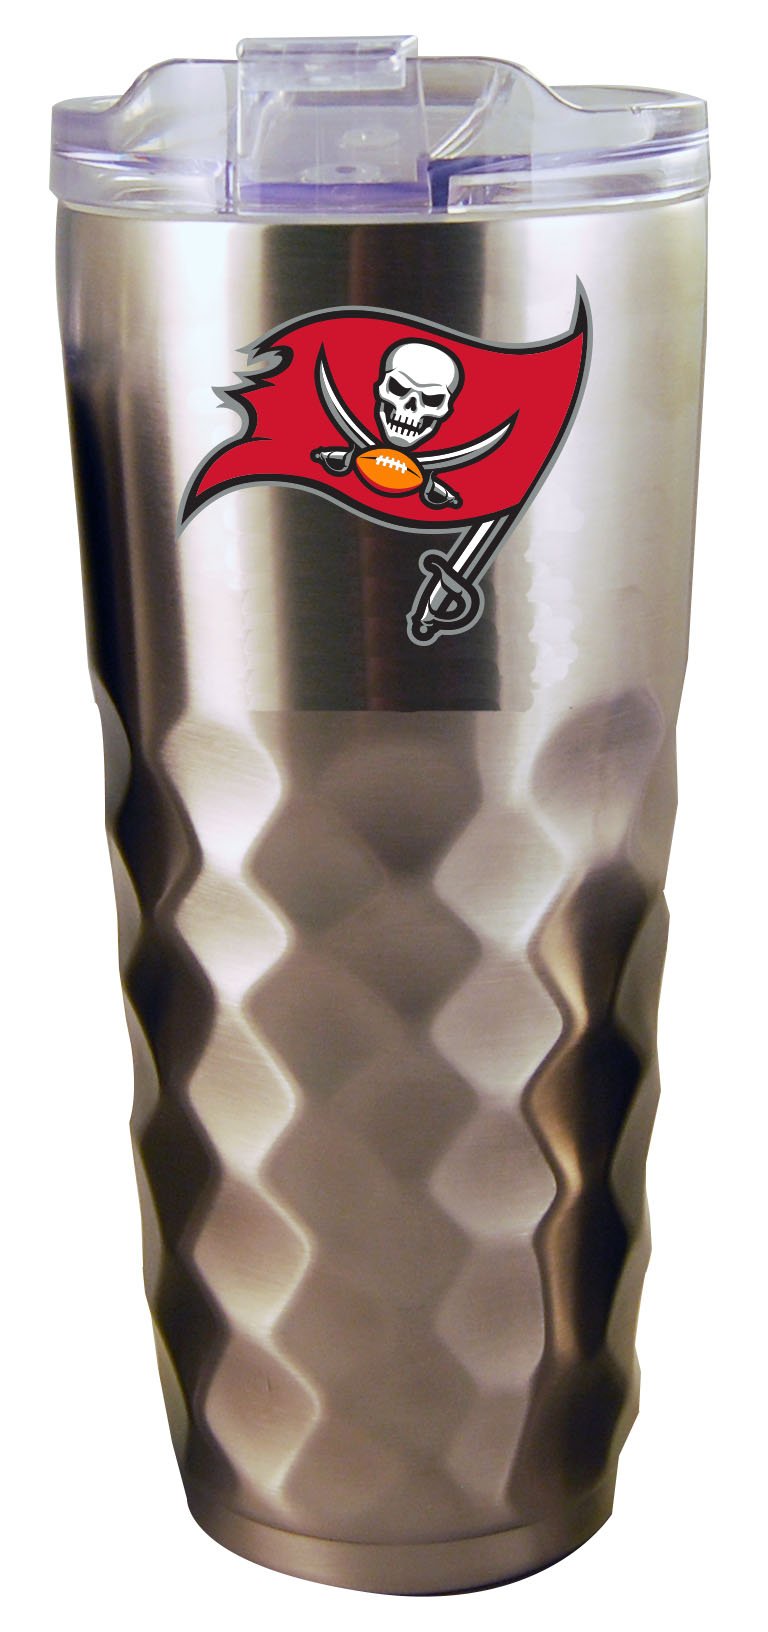 32oz Stainless Steel Diamond Tumbler | Buccaneers
CurrentProduct, Drinkware_category_All, NFL, Tampa Bay Buccaneers, TBB
The Memory Company